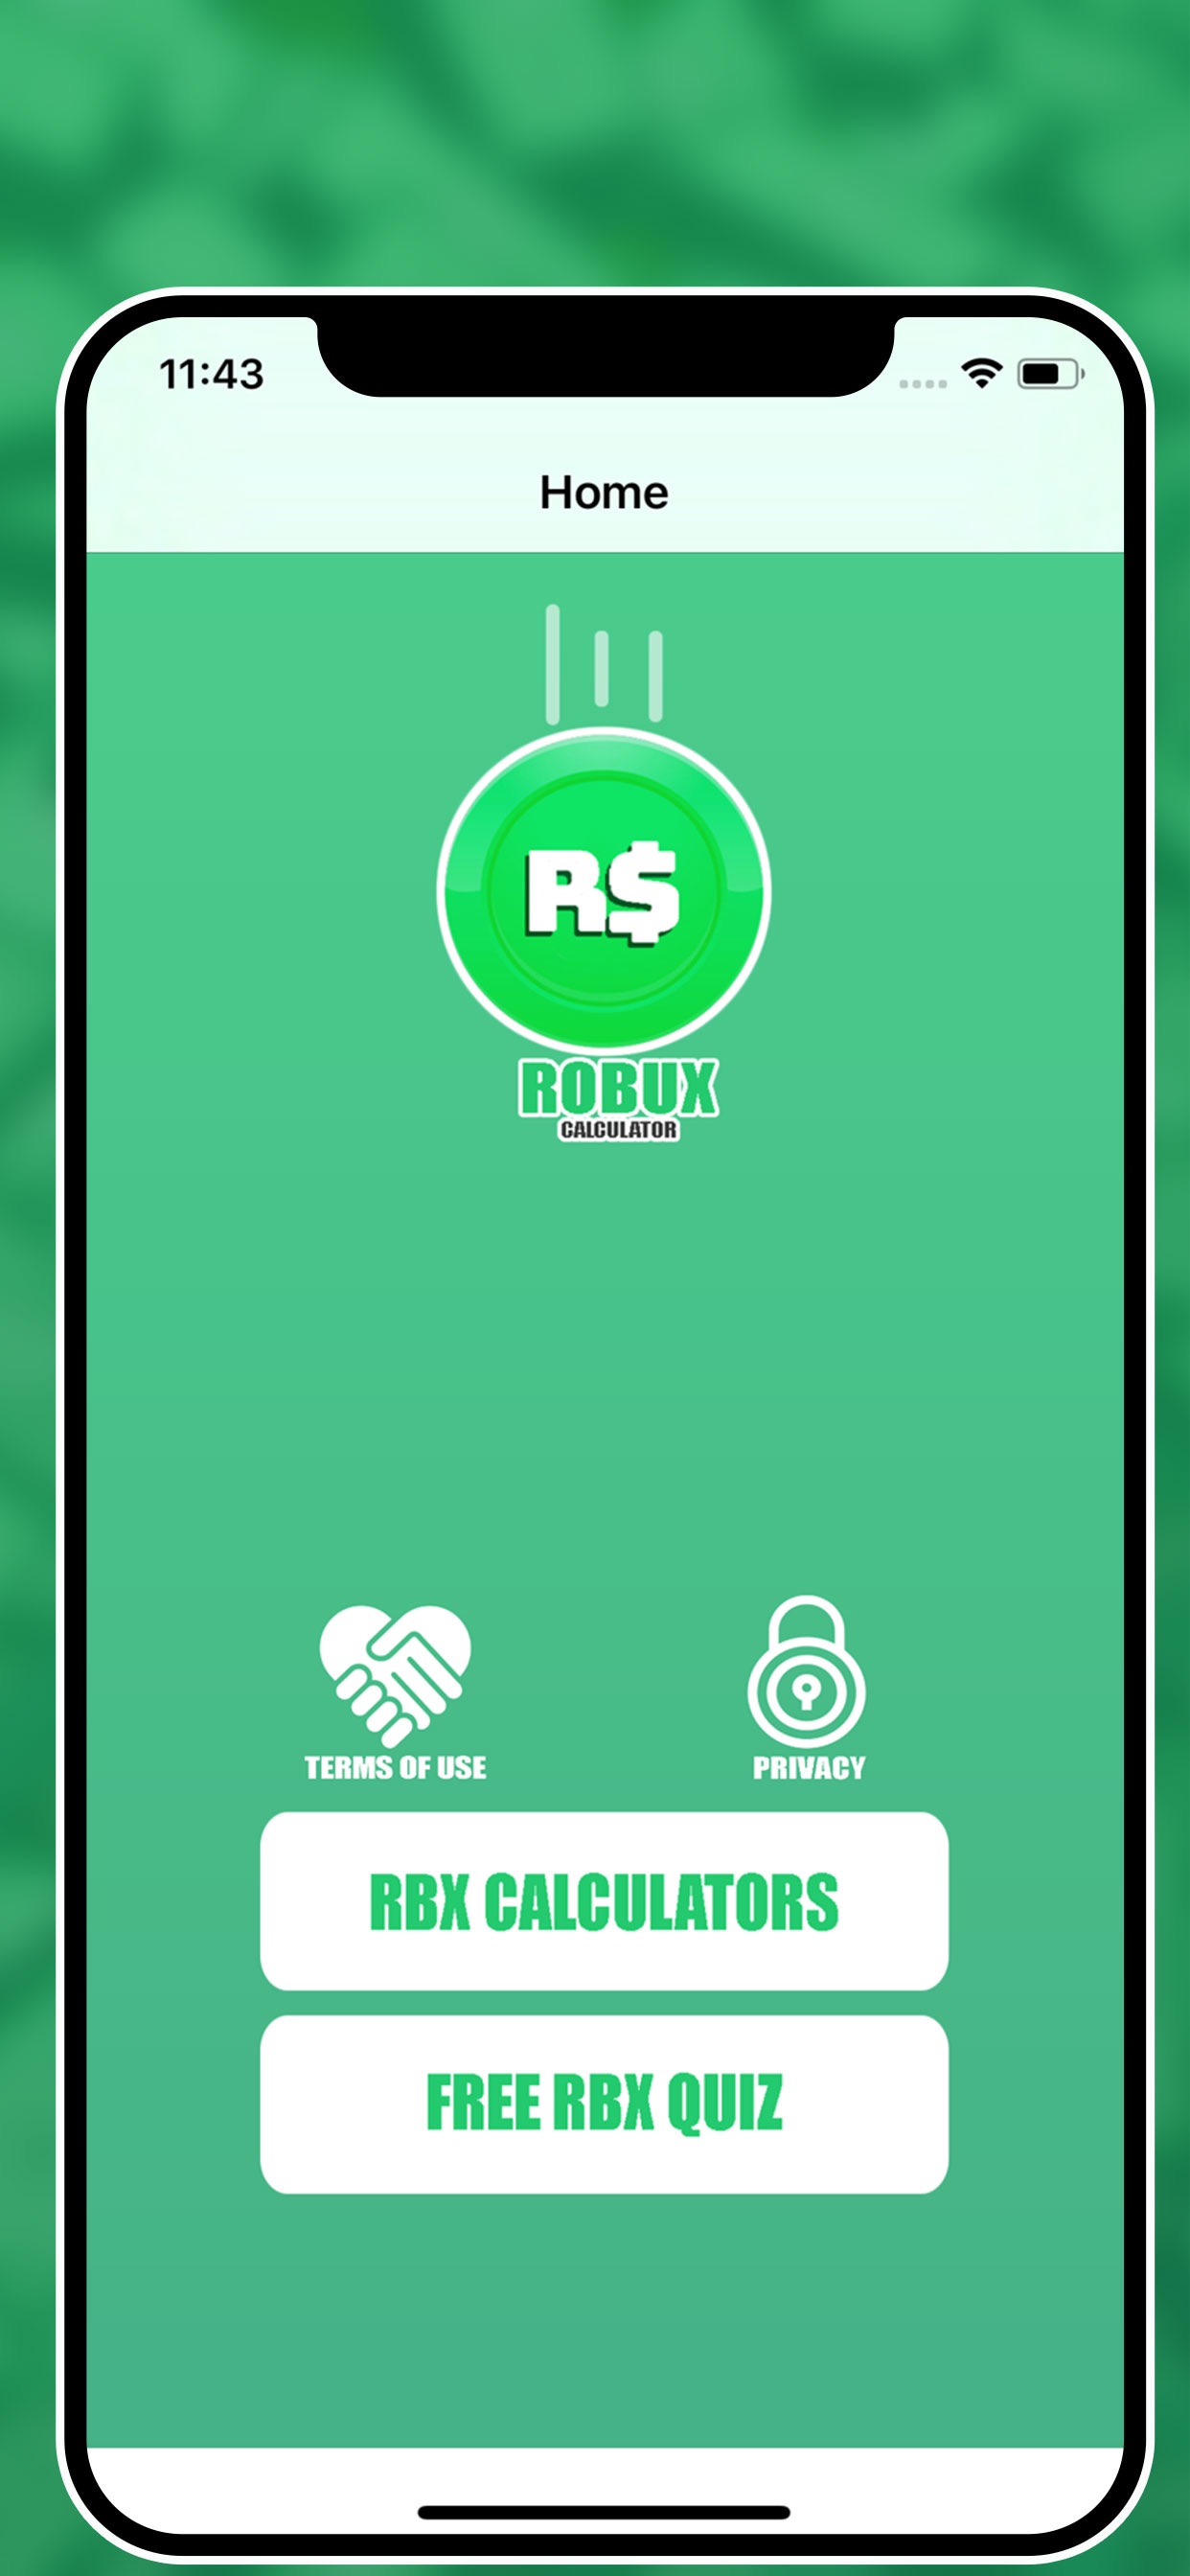 Robux Calculator For Rblox App Store Review Aso Revenue Downloads Appfollow - answers for roblox quiz in rbx.tools